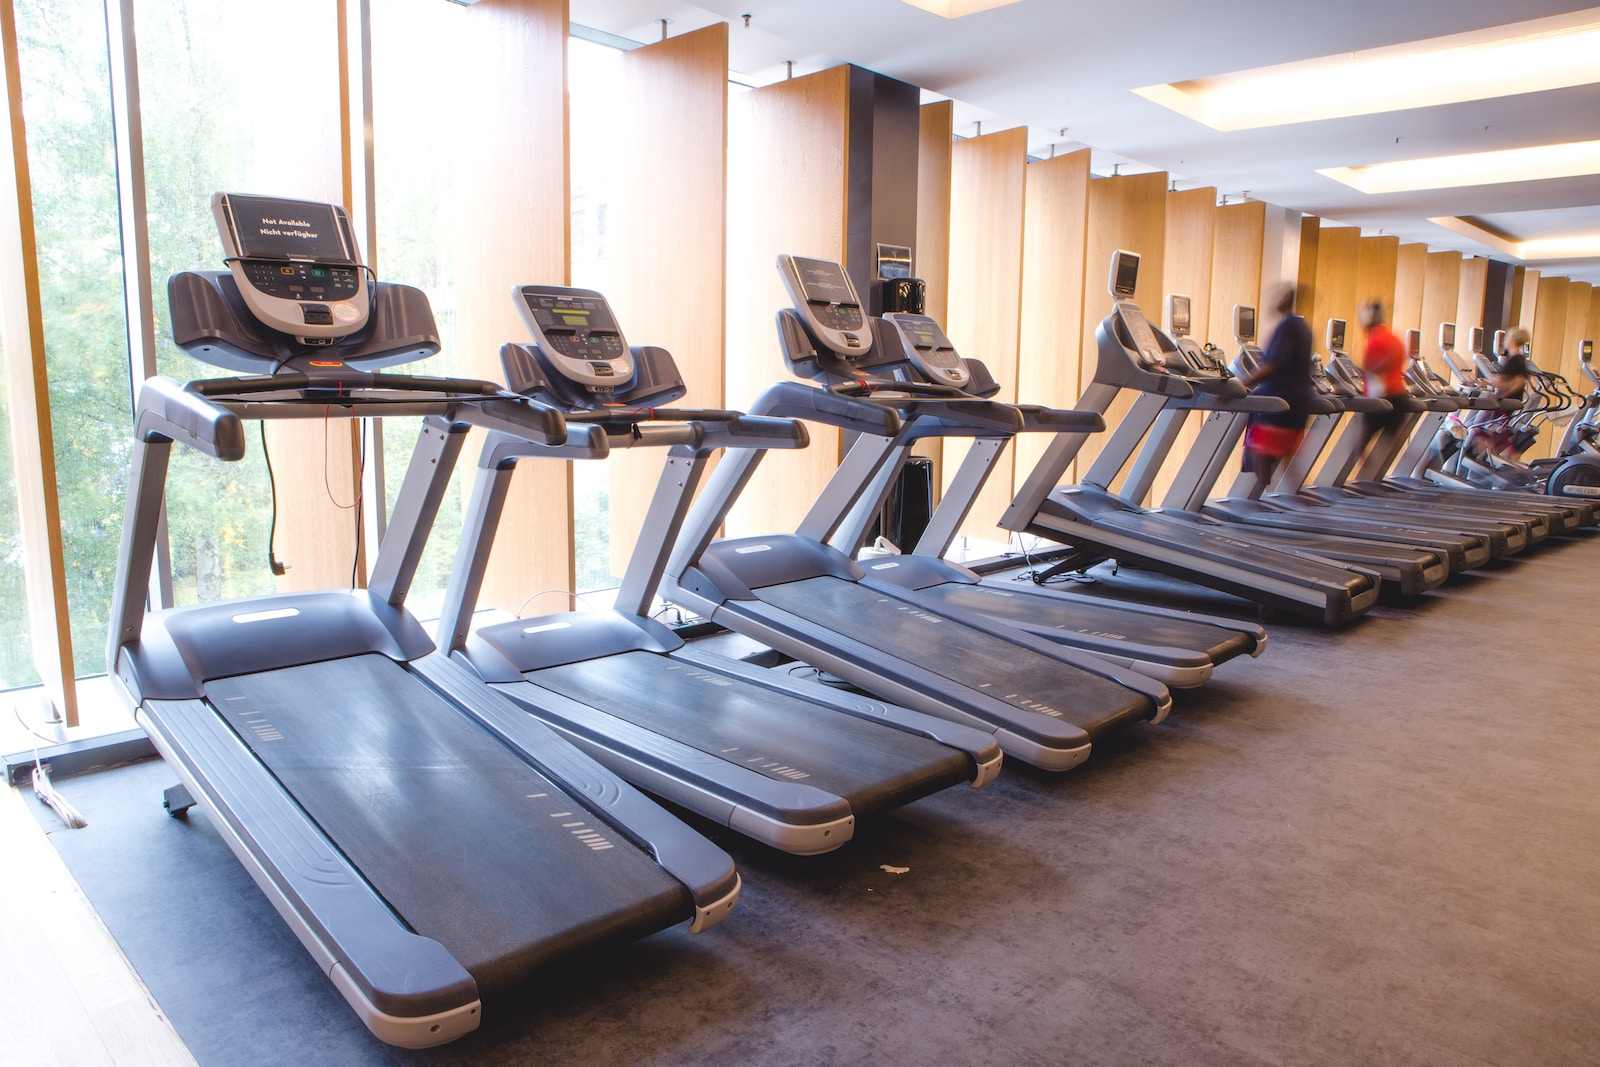 
Are Motorless Treadmills Any Good? Here Is What You Should Know...